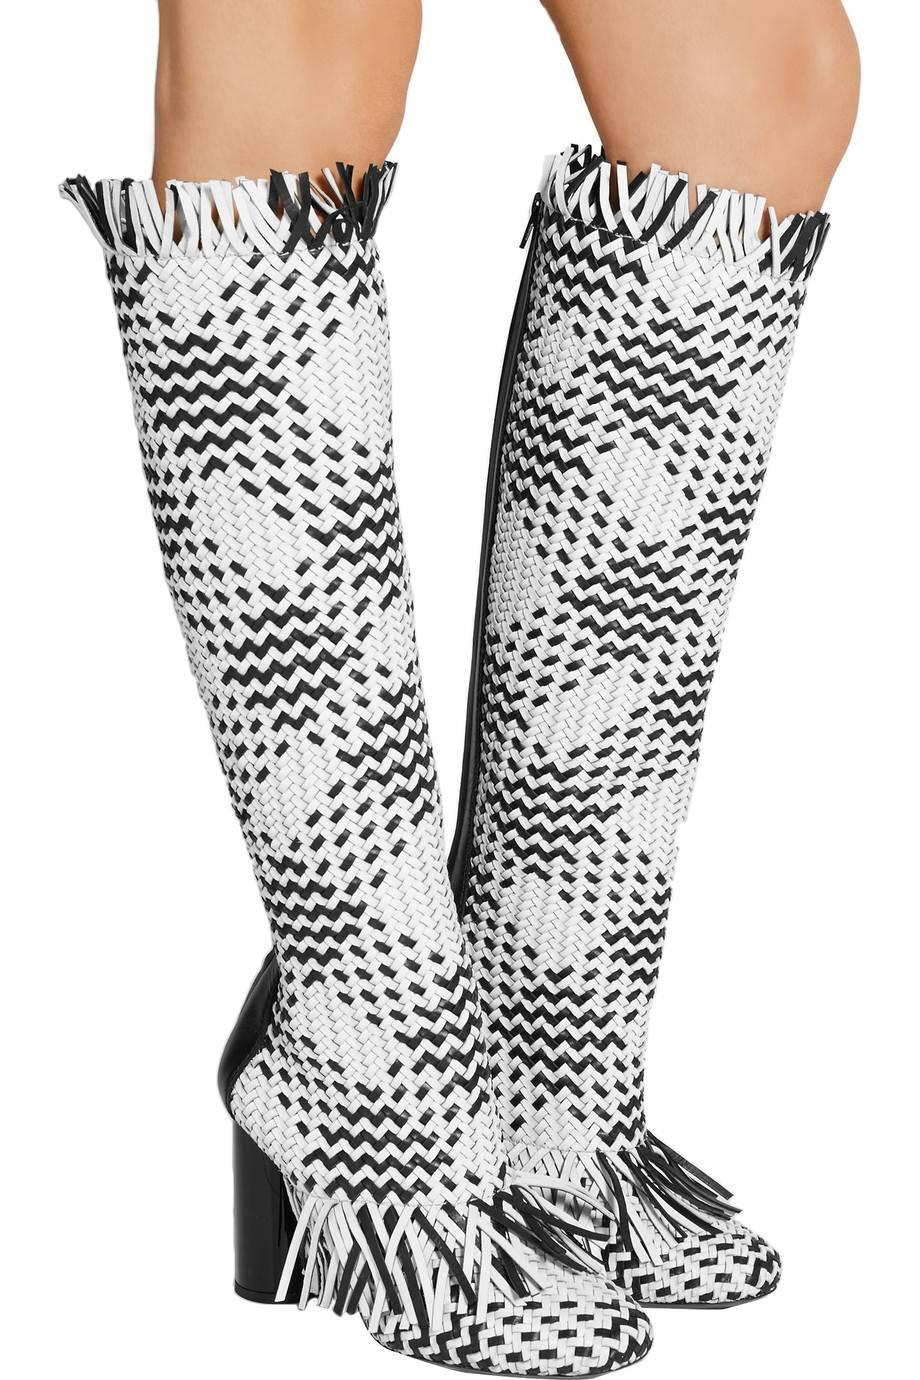 CURATOR'S NOTES

LAST PAIR!  Proenza Schouler New Sold Out Black White Fringe Knee High Boots in Box AVAILABLE at Newfound Luxury

Original retail price $2,995
Size IT 36
Leather
Zipper back closure
Made in Italy
Heel height 4"
Includes